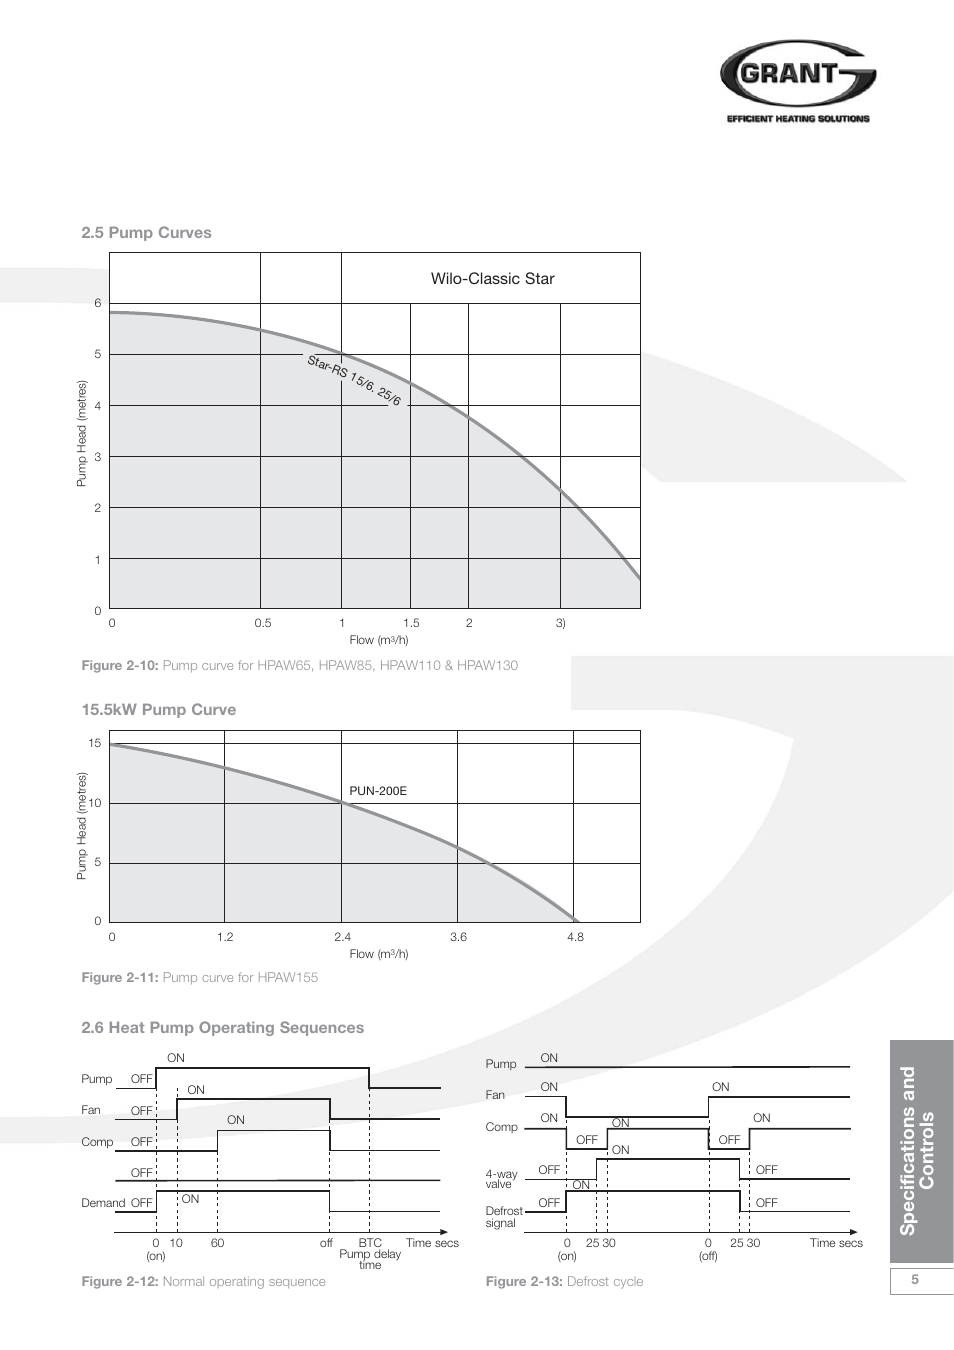 Specifications and contr ols, 5 pump curves, Wilo-classic star | 6 heat pump operating sequences, 5kw pump curve | Grant Products HPAW155 User Manual | Page 9 / 50